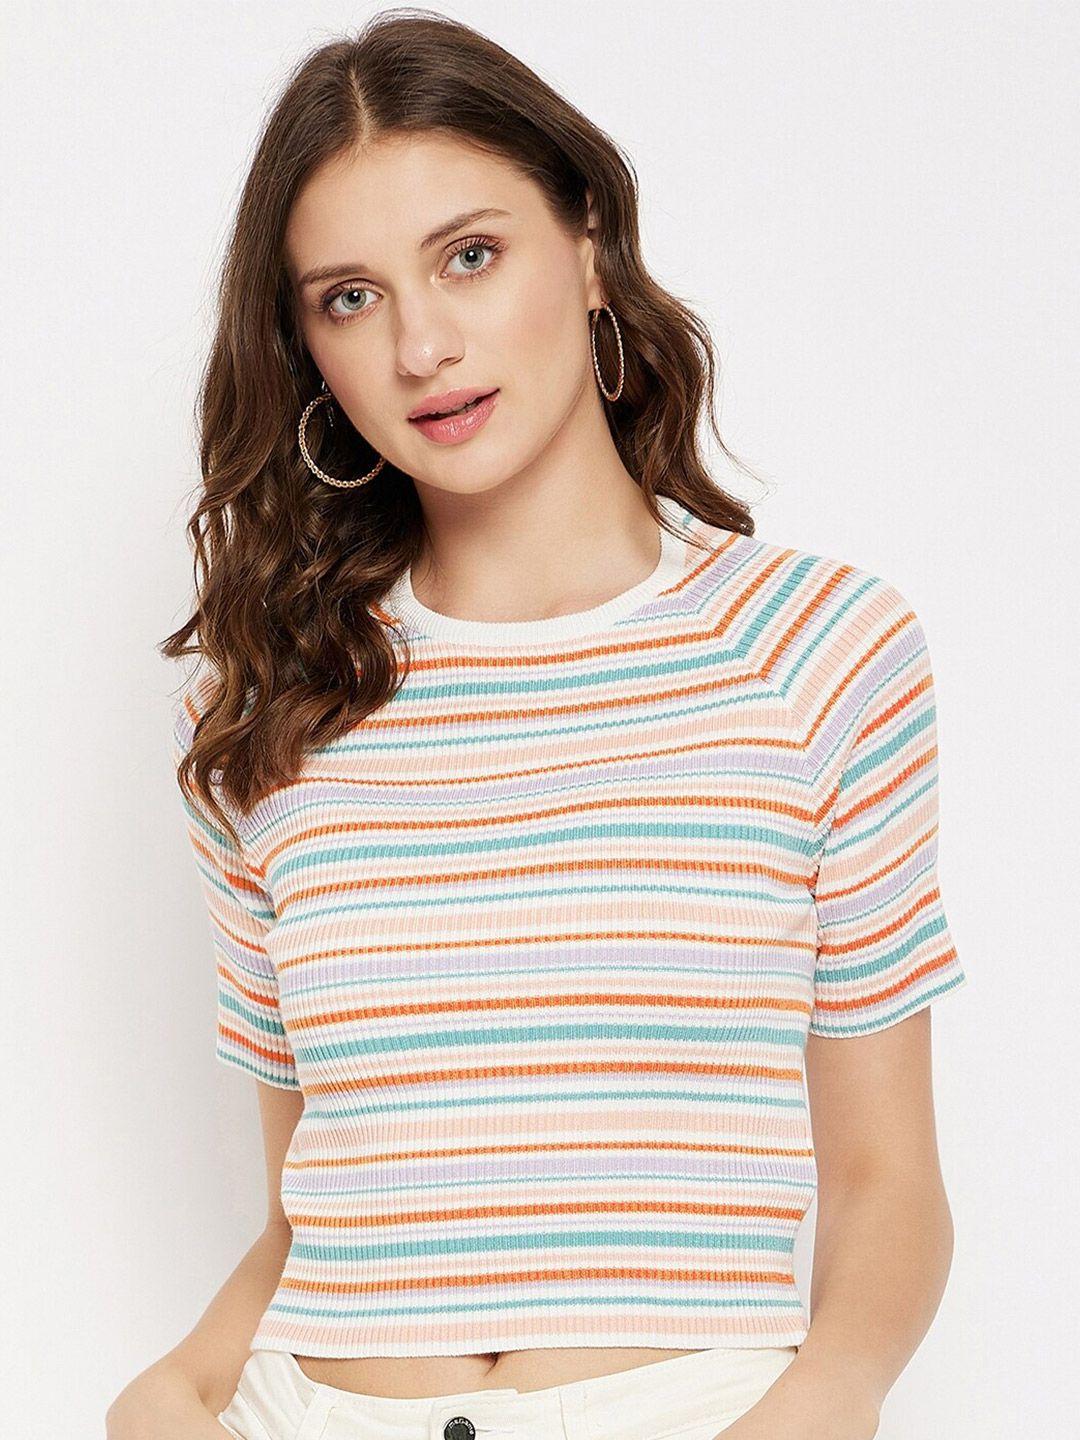 madame-horizontal-stripes-striped-knitted-top